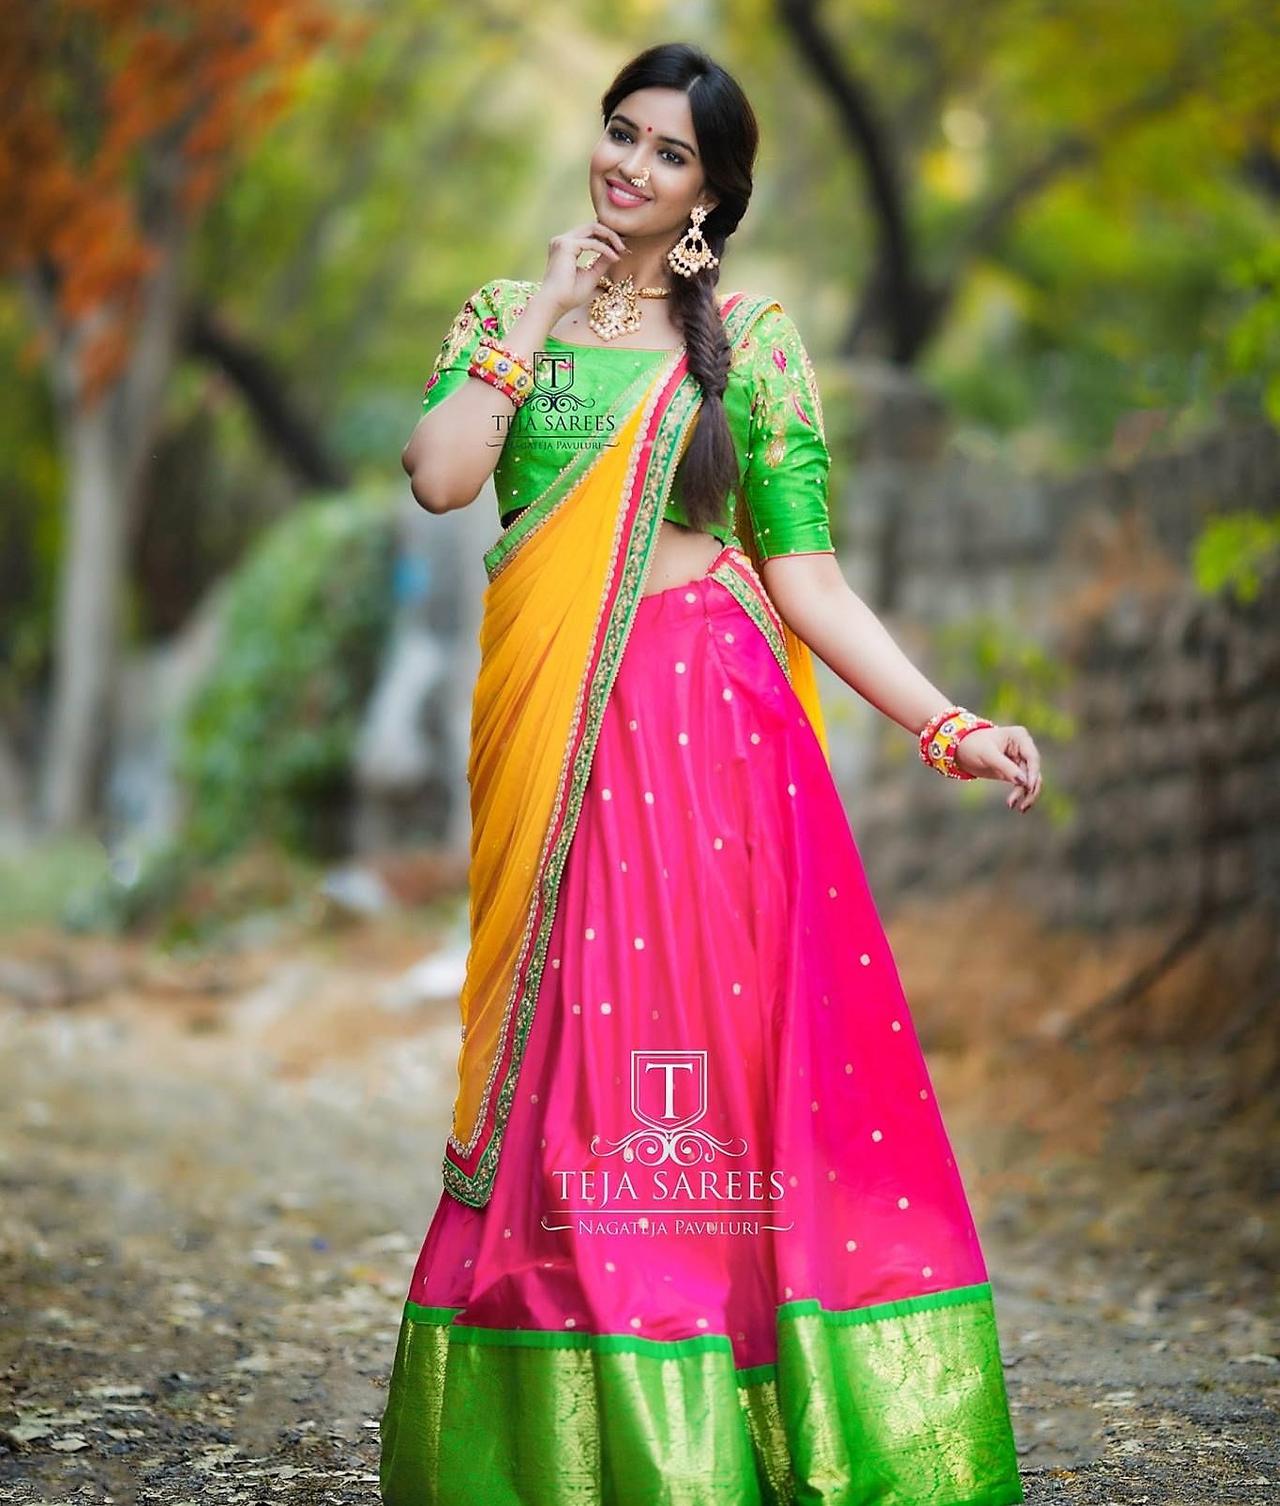 12 Trending Half Sarees for Special Occasions - Candy Crow